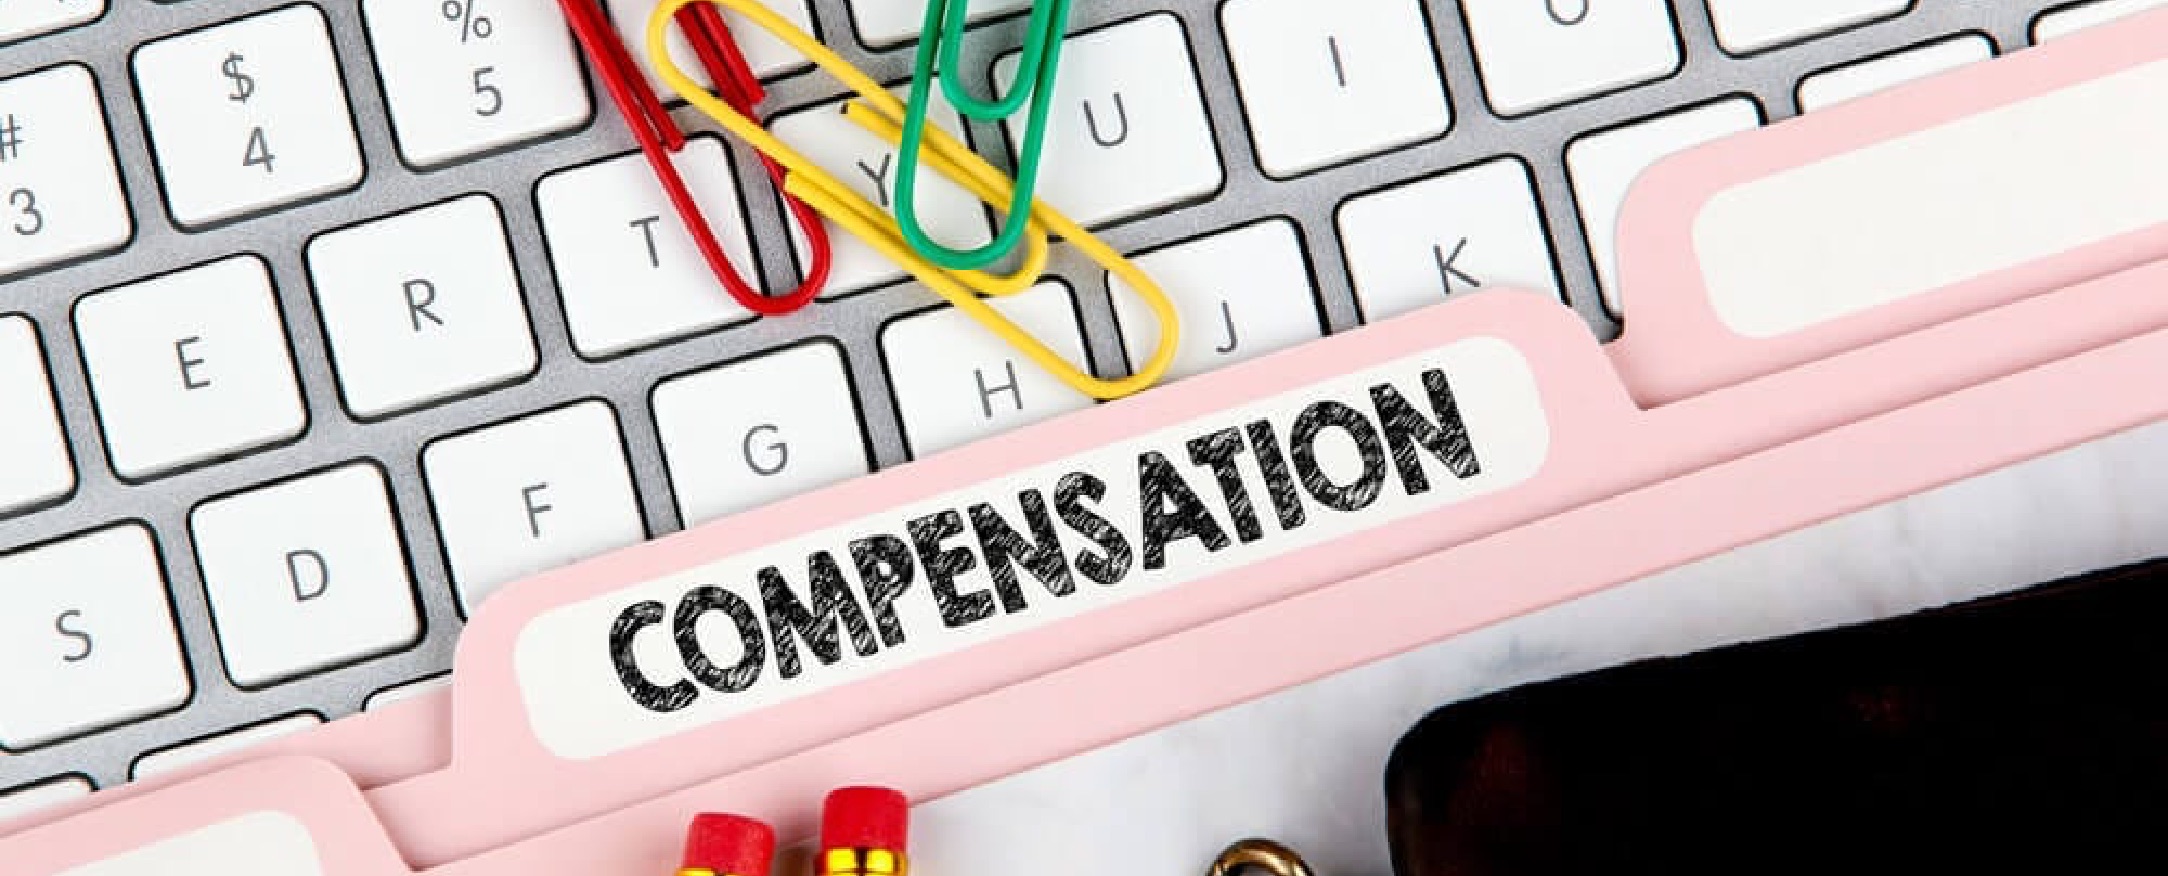 CloudResearch_Blog_Creating Compensation HITs for Mechanical Turk Workers_Comensation folder@2x